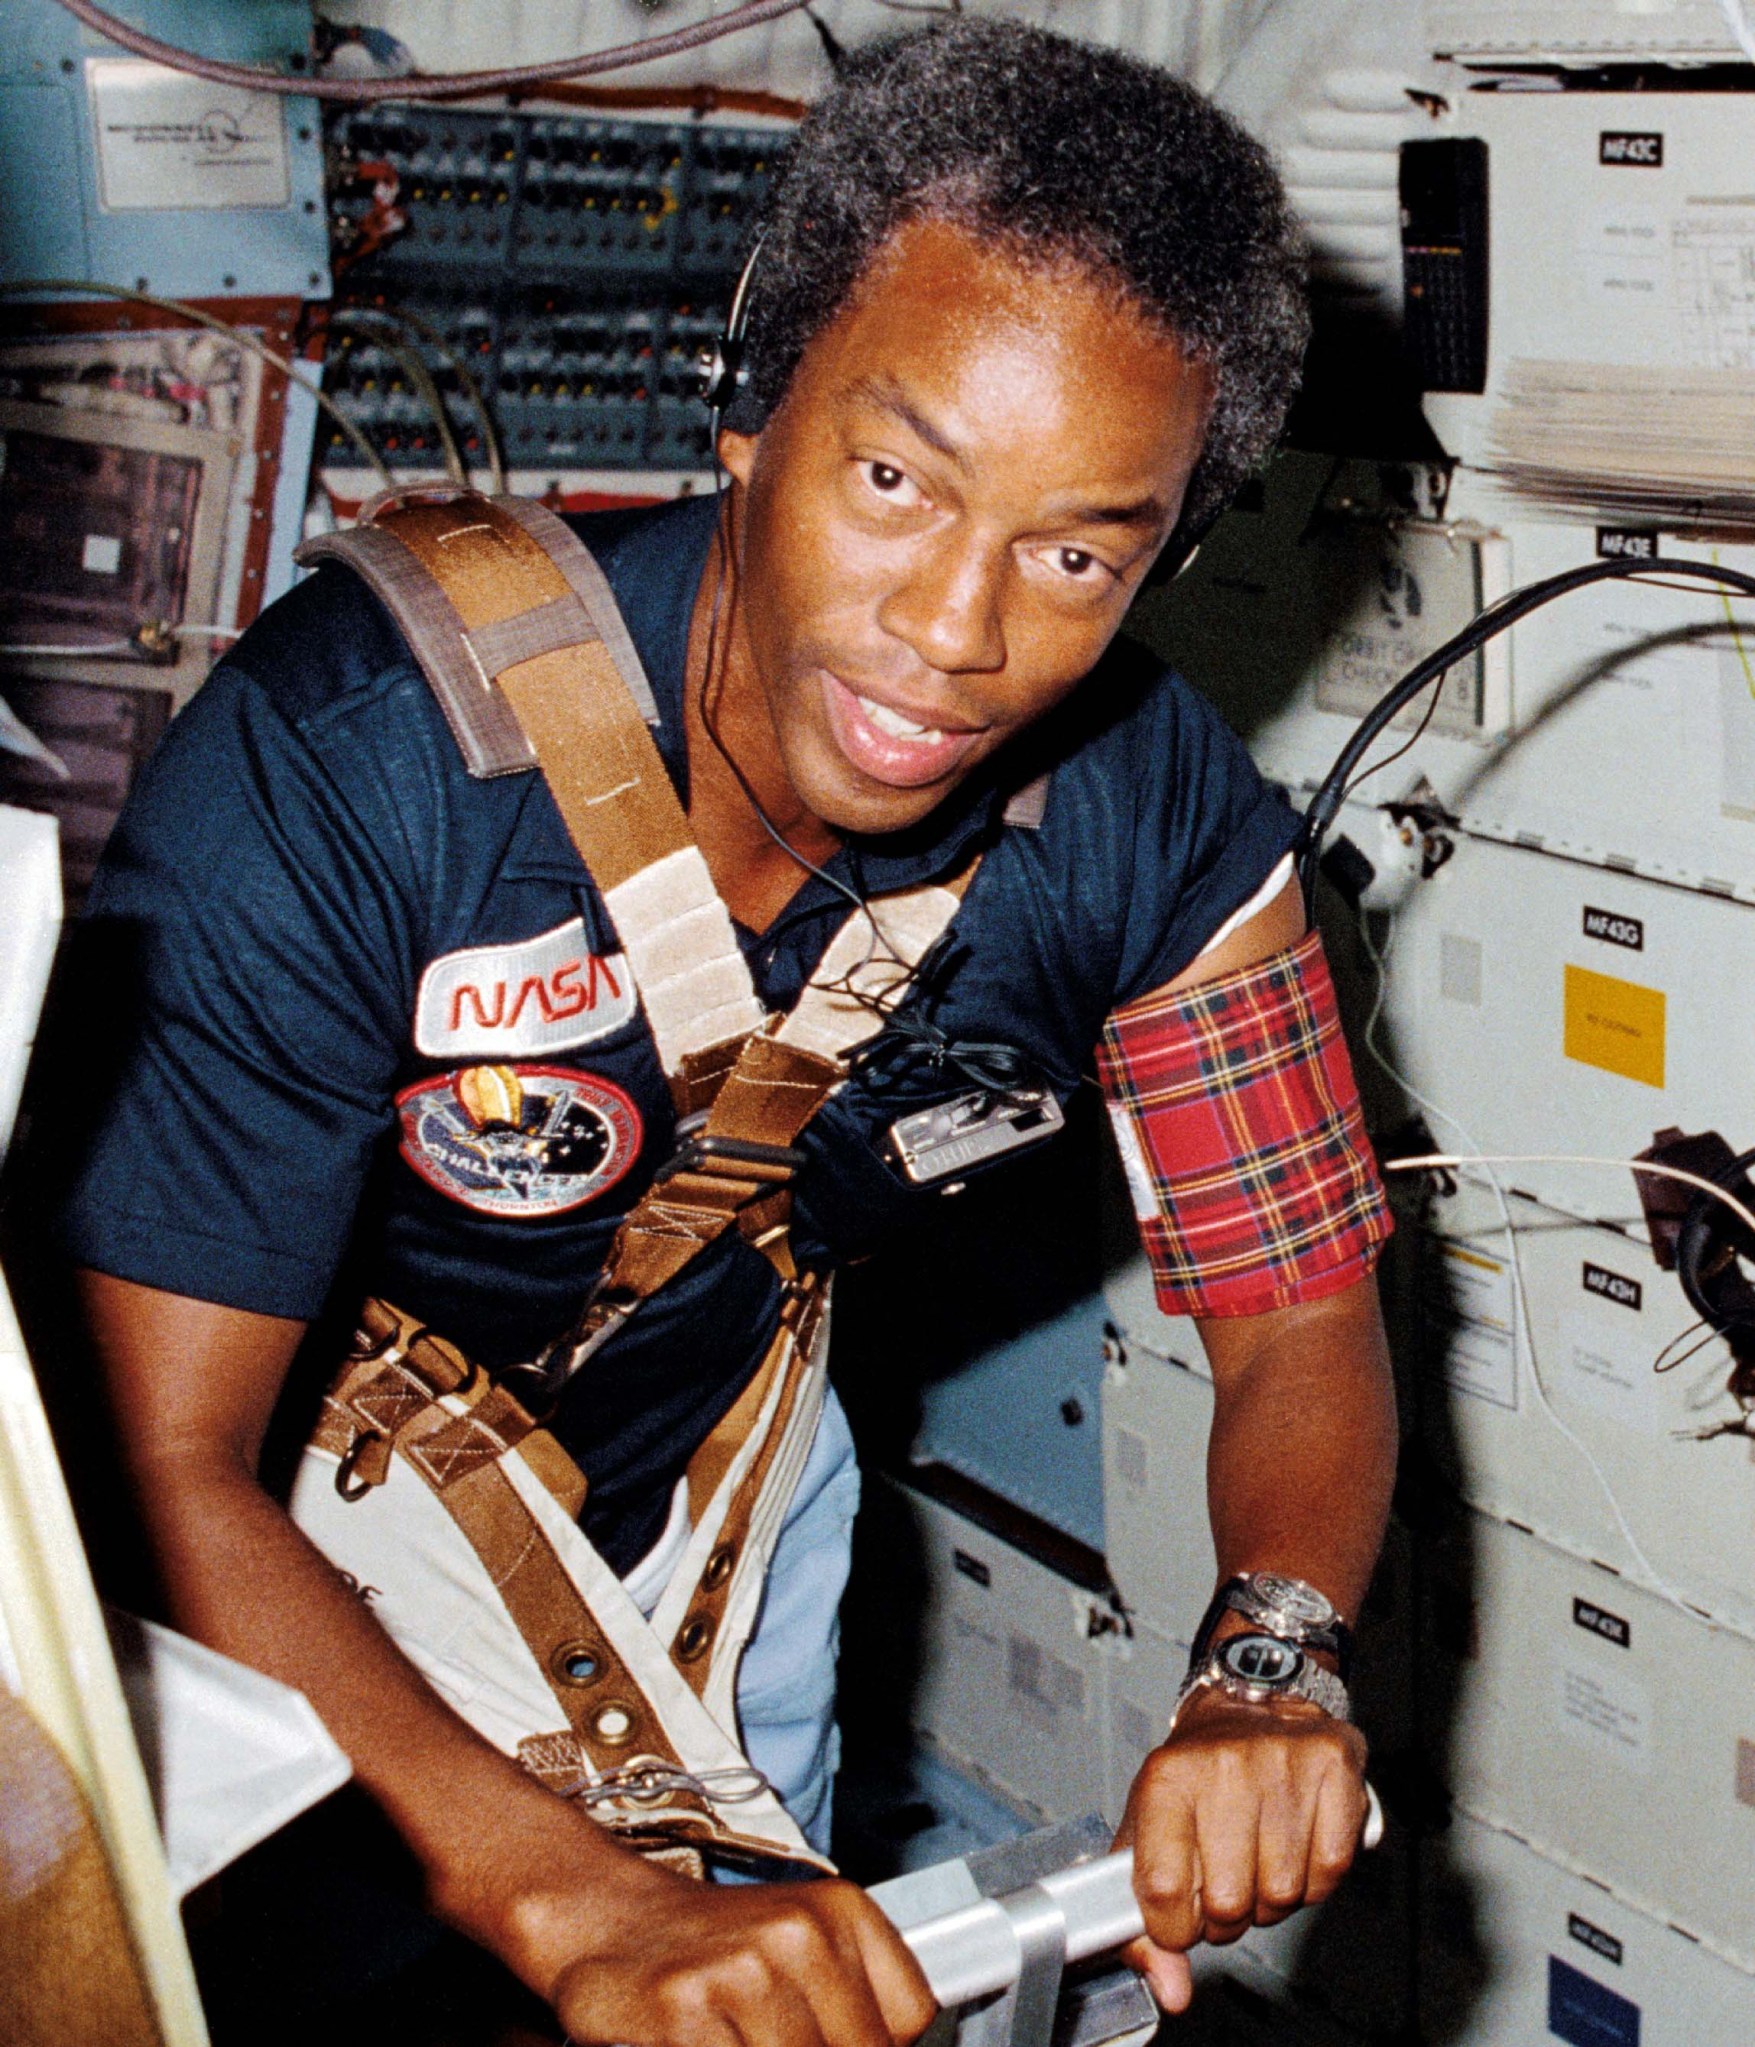 NASA astronaut Guy Bluford, the first African-American in space, uses a treadmill exercising device for a medical test during the STS-8 space shuttle mission in 1983.